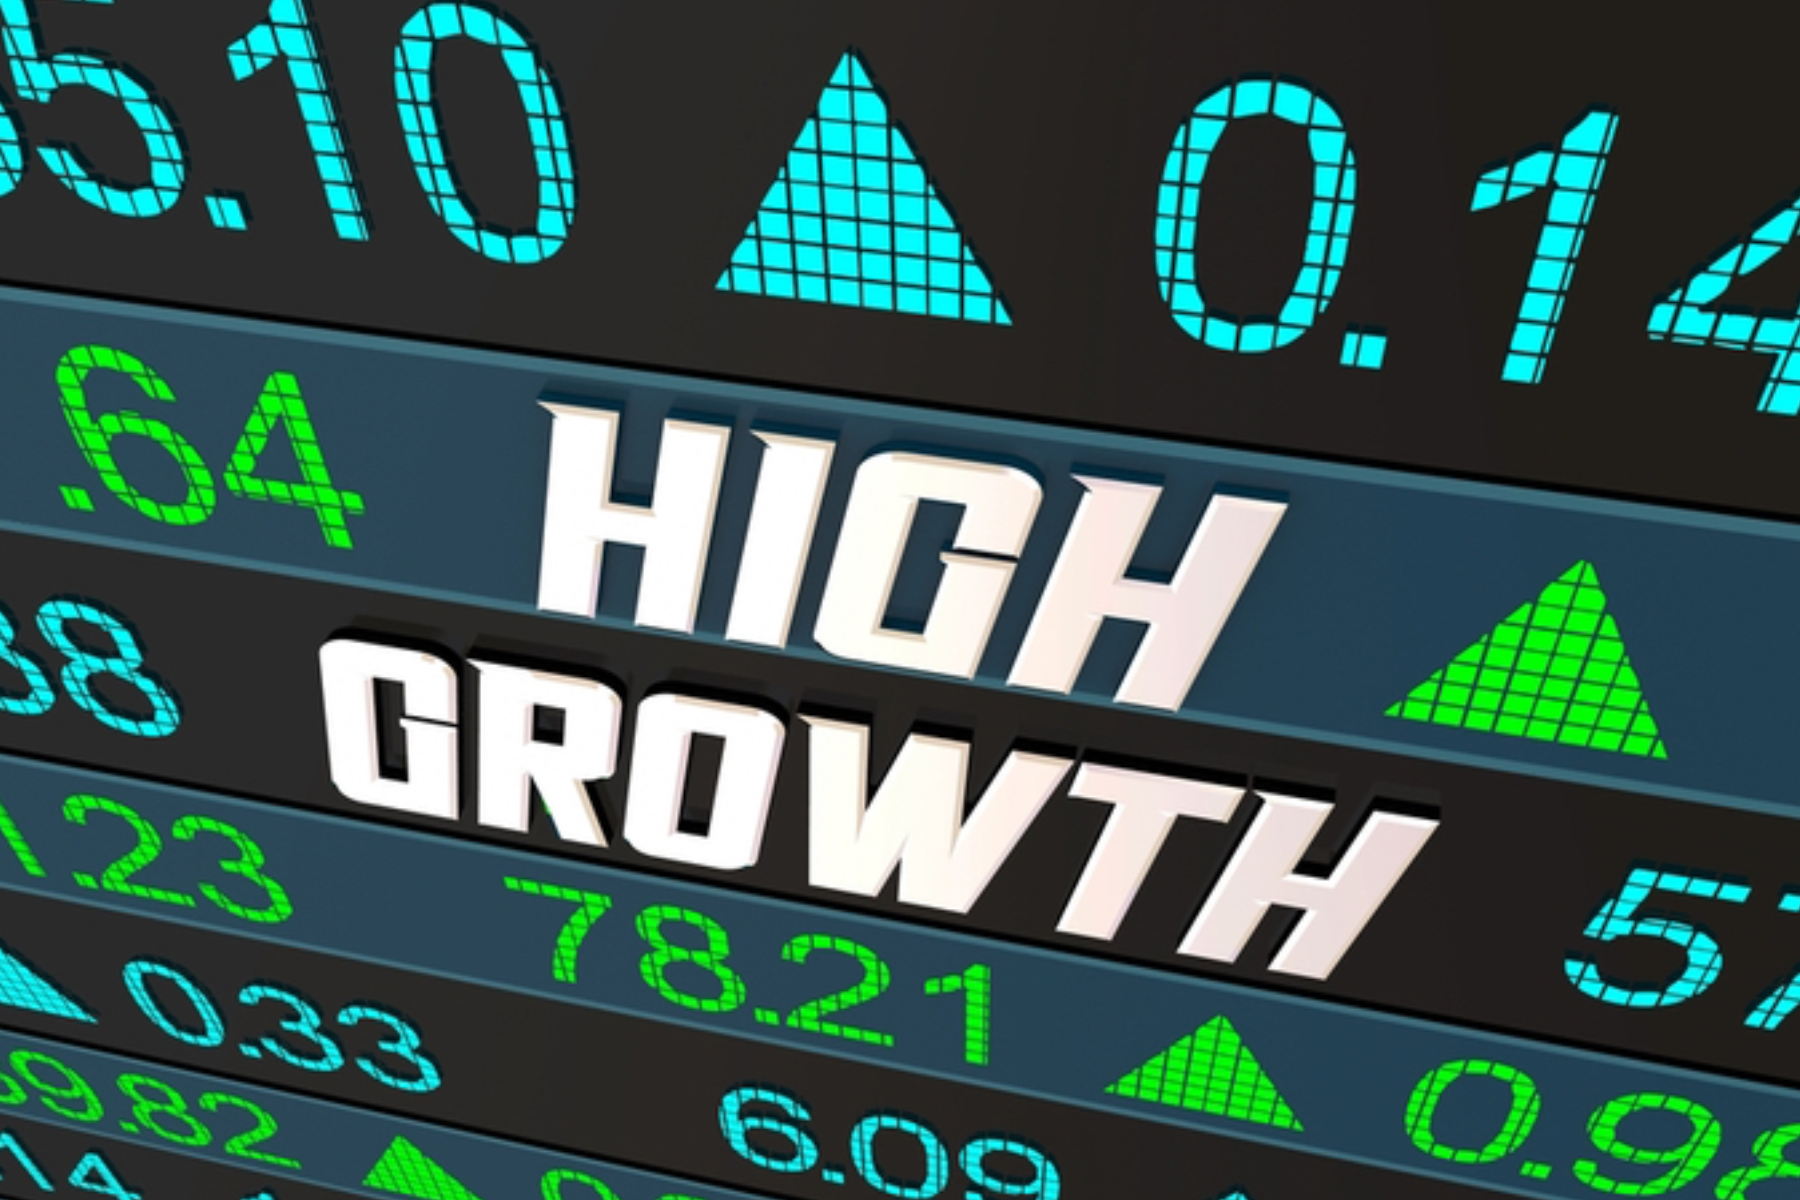 The words "High Growth" in the center, surrounded by large numbers and percentages